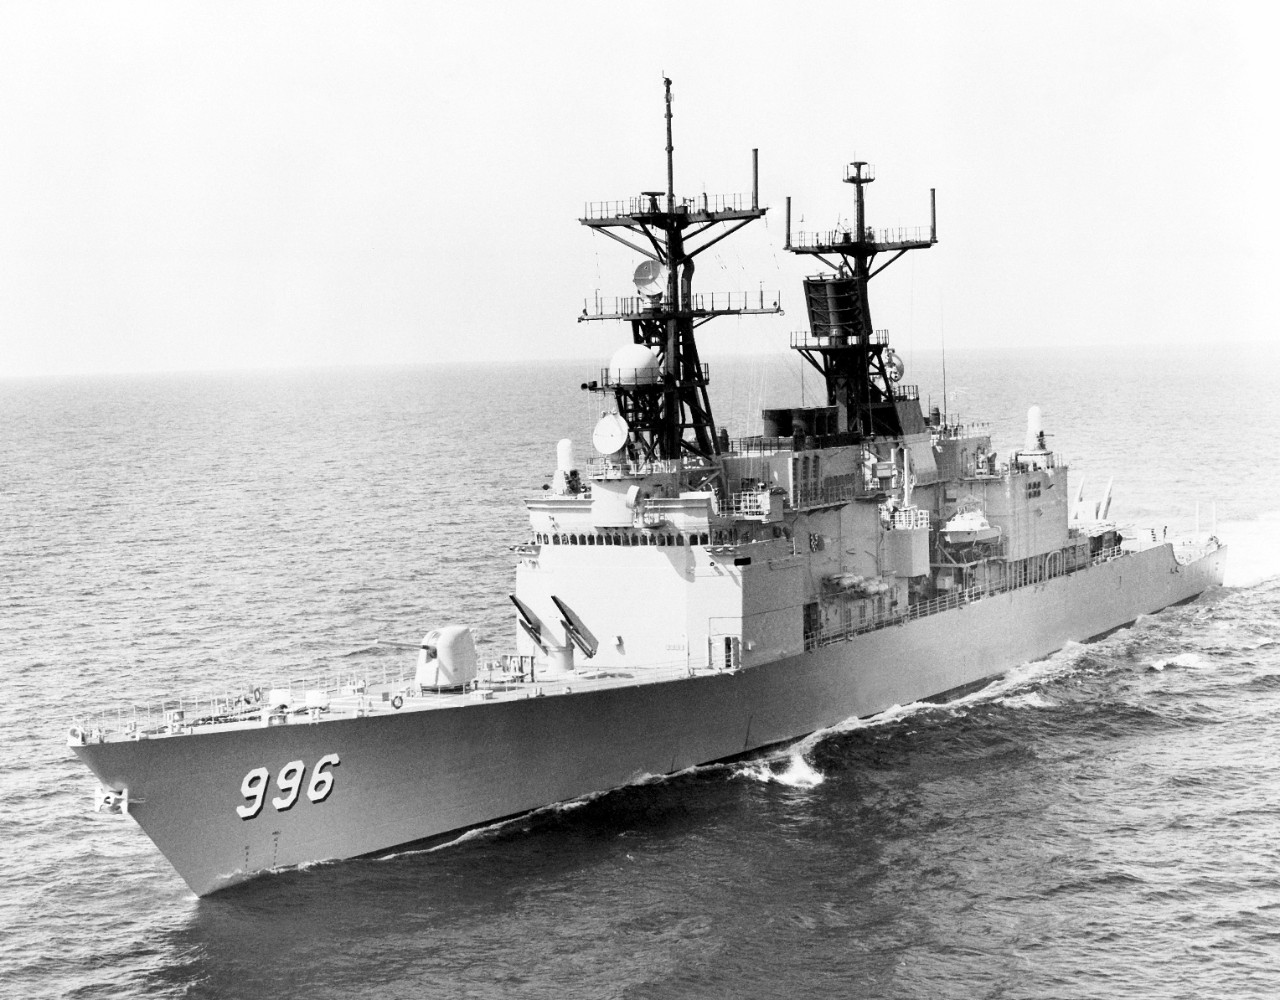 Chandler underway, February 1983. (U.S. Navy Photograph DN-SN-83-05572, National Archives and Records Administration, Still Pictures Division, College Park, Md.)